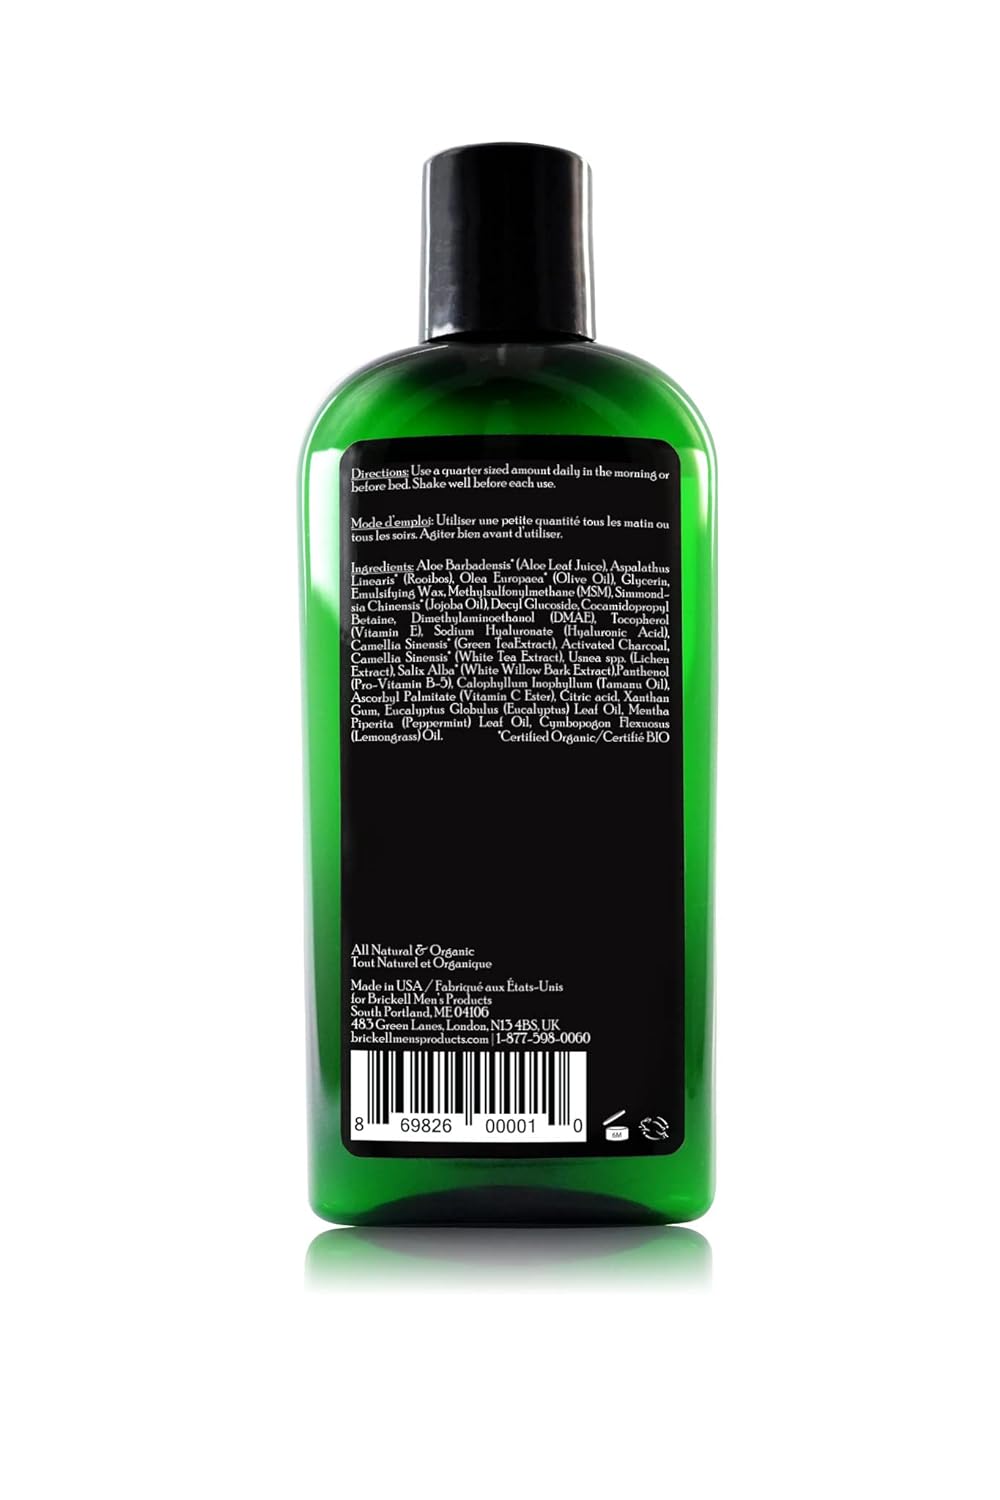 Brickell Men's Purifying Charcoal Face Wash for Men, Natural and Organic Daily Facial Cleanser, 8 Ounce, Scented : Beauty & Personal Care